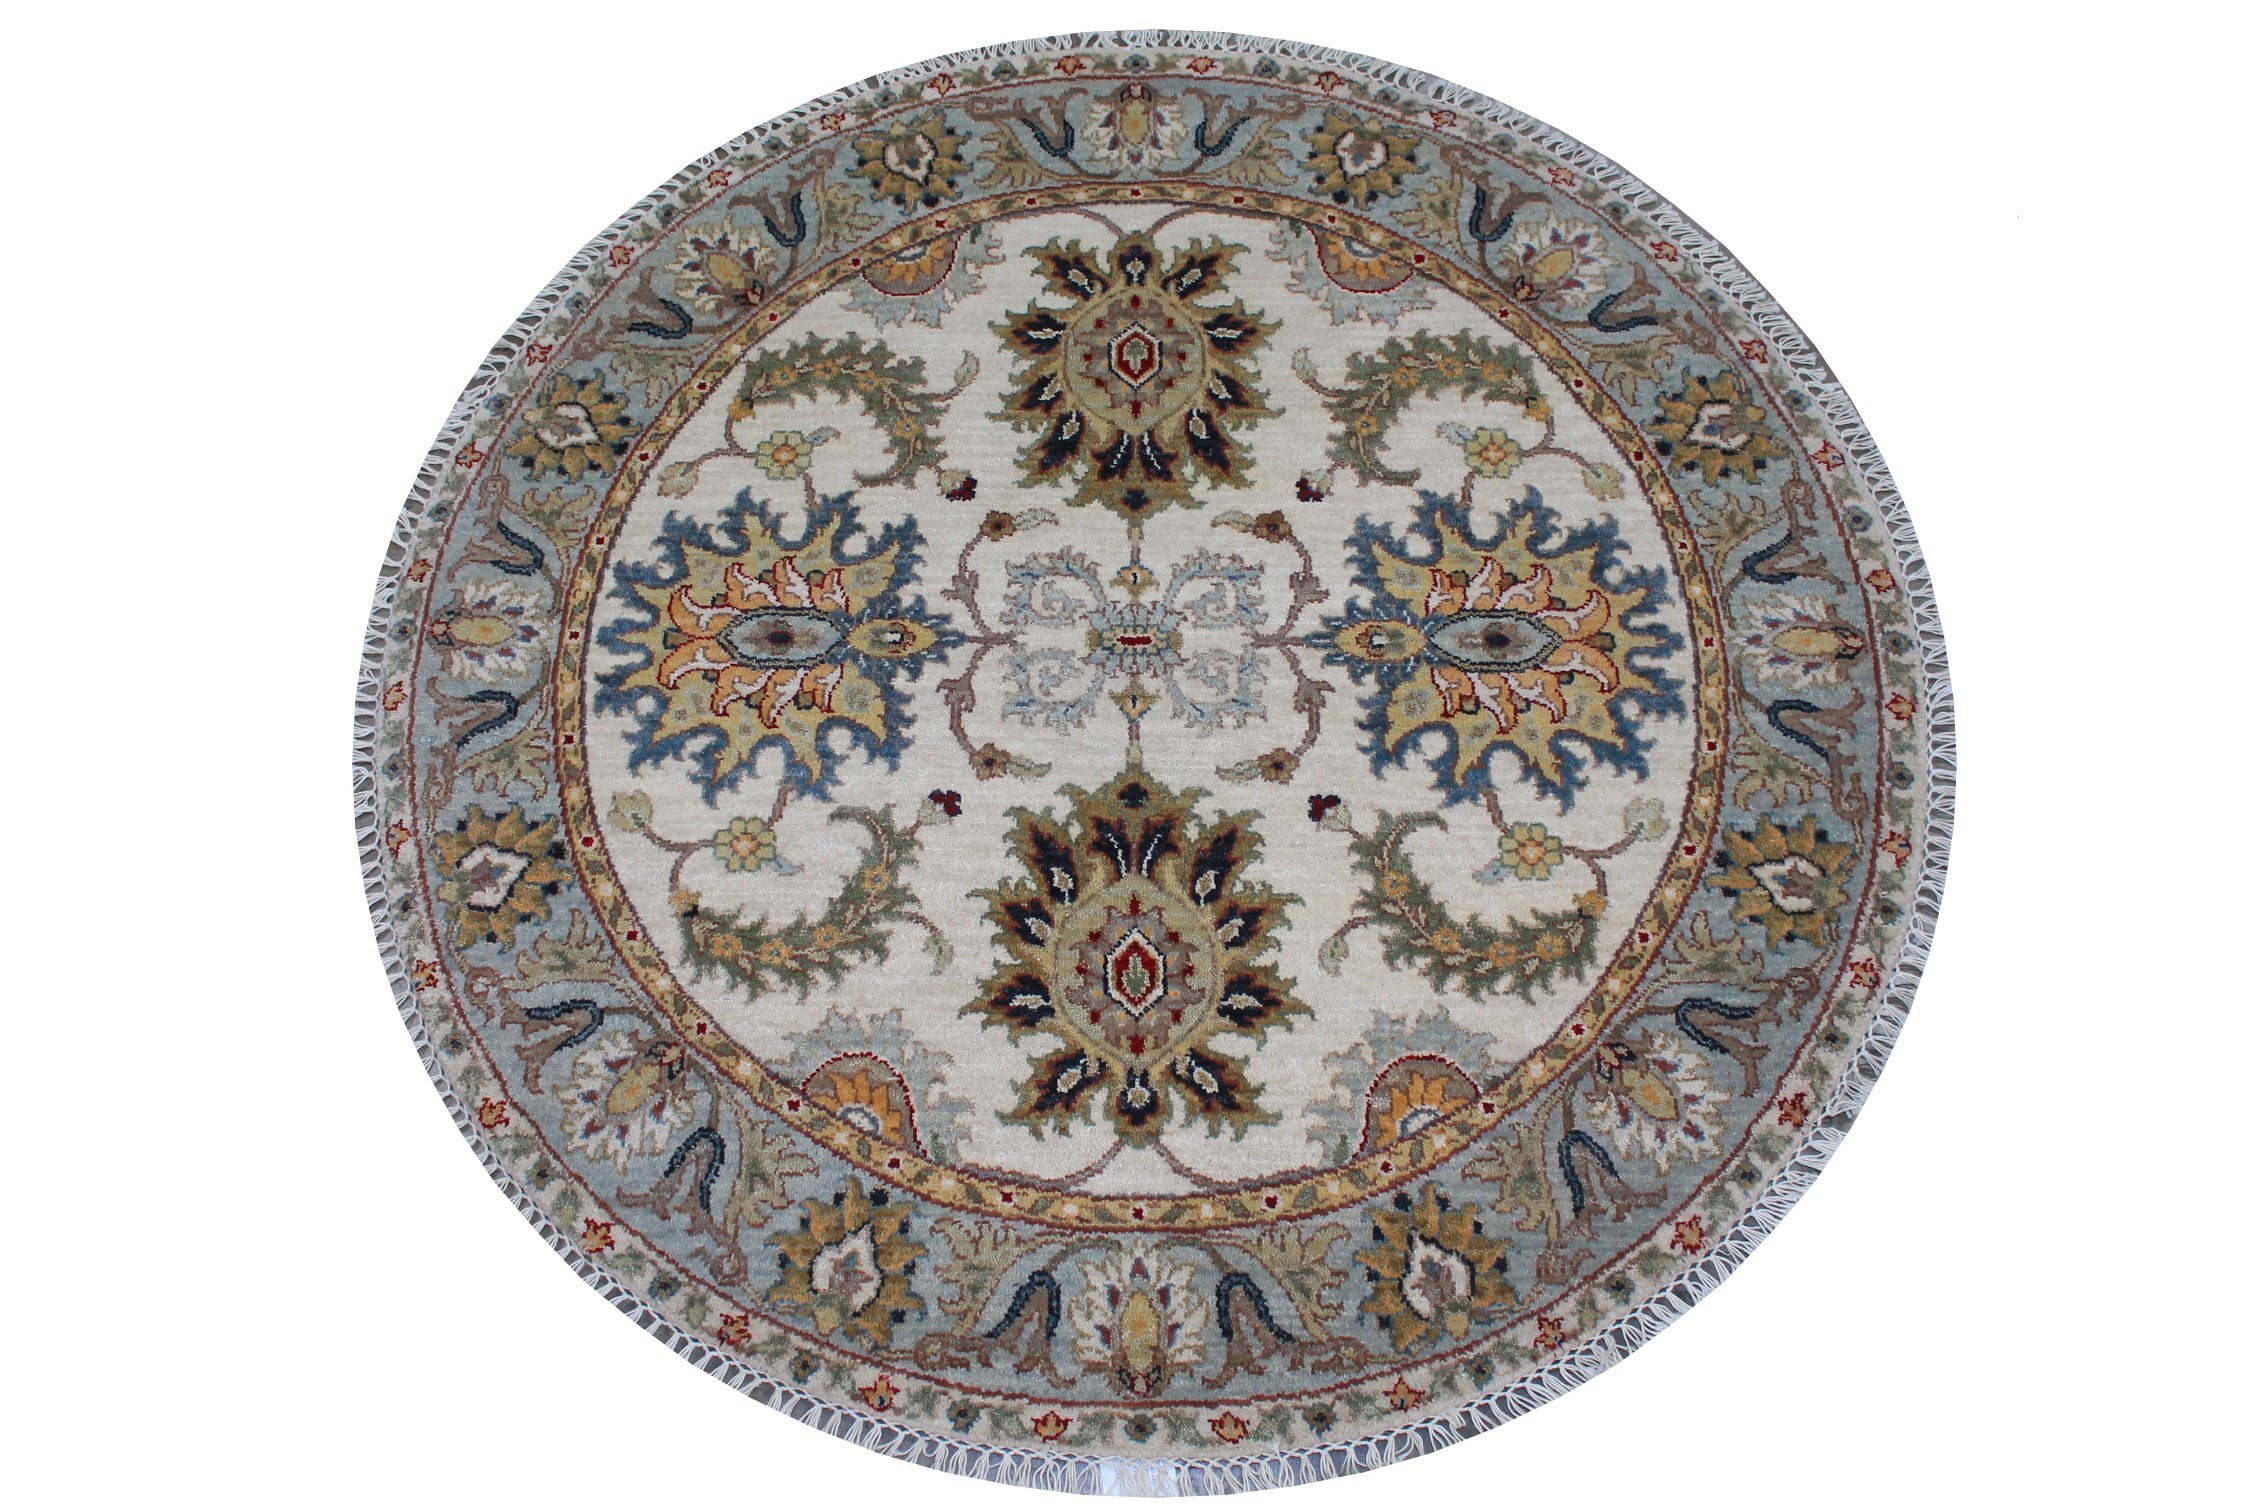 4 ft. Round & Square Traditional Hand Knotted Wool Area Rug - MR025637